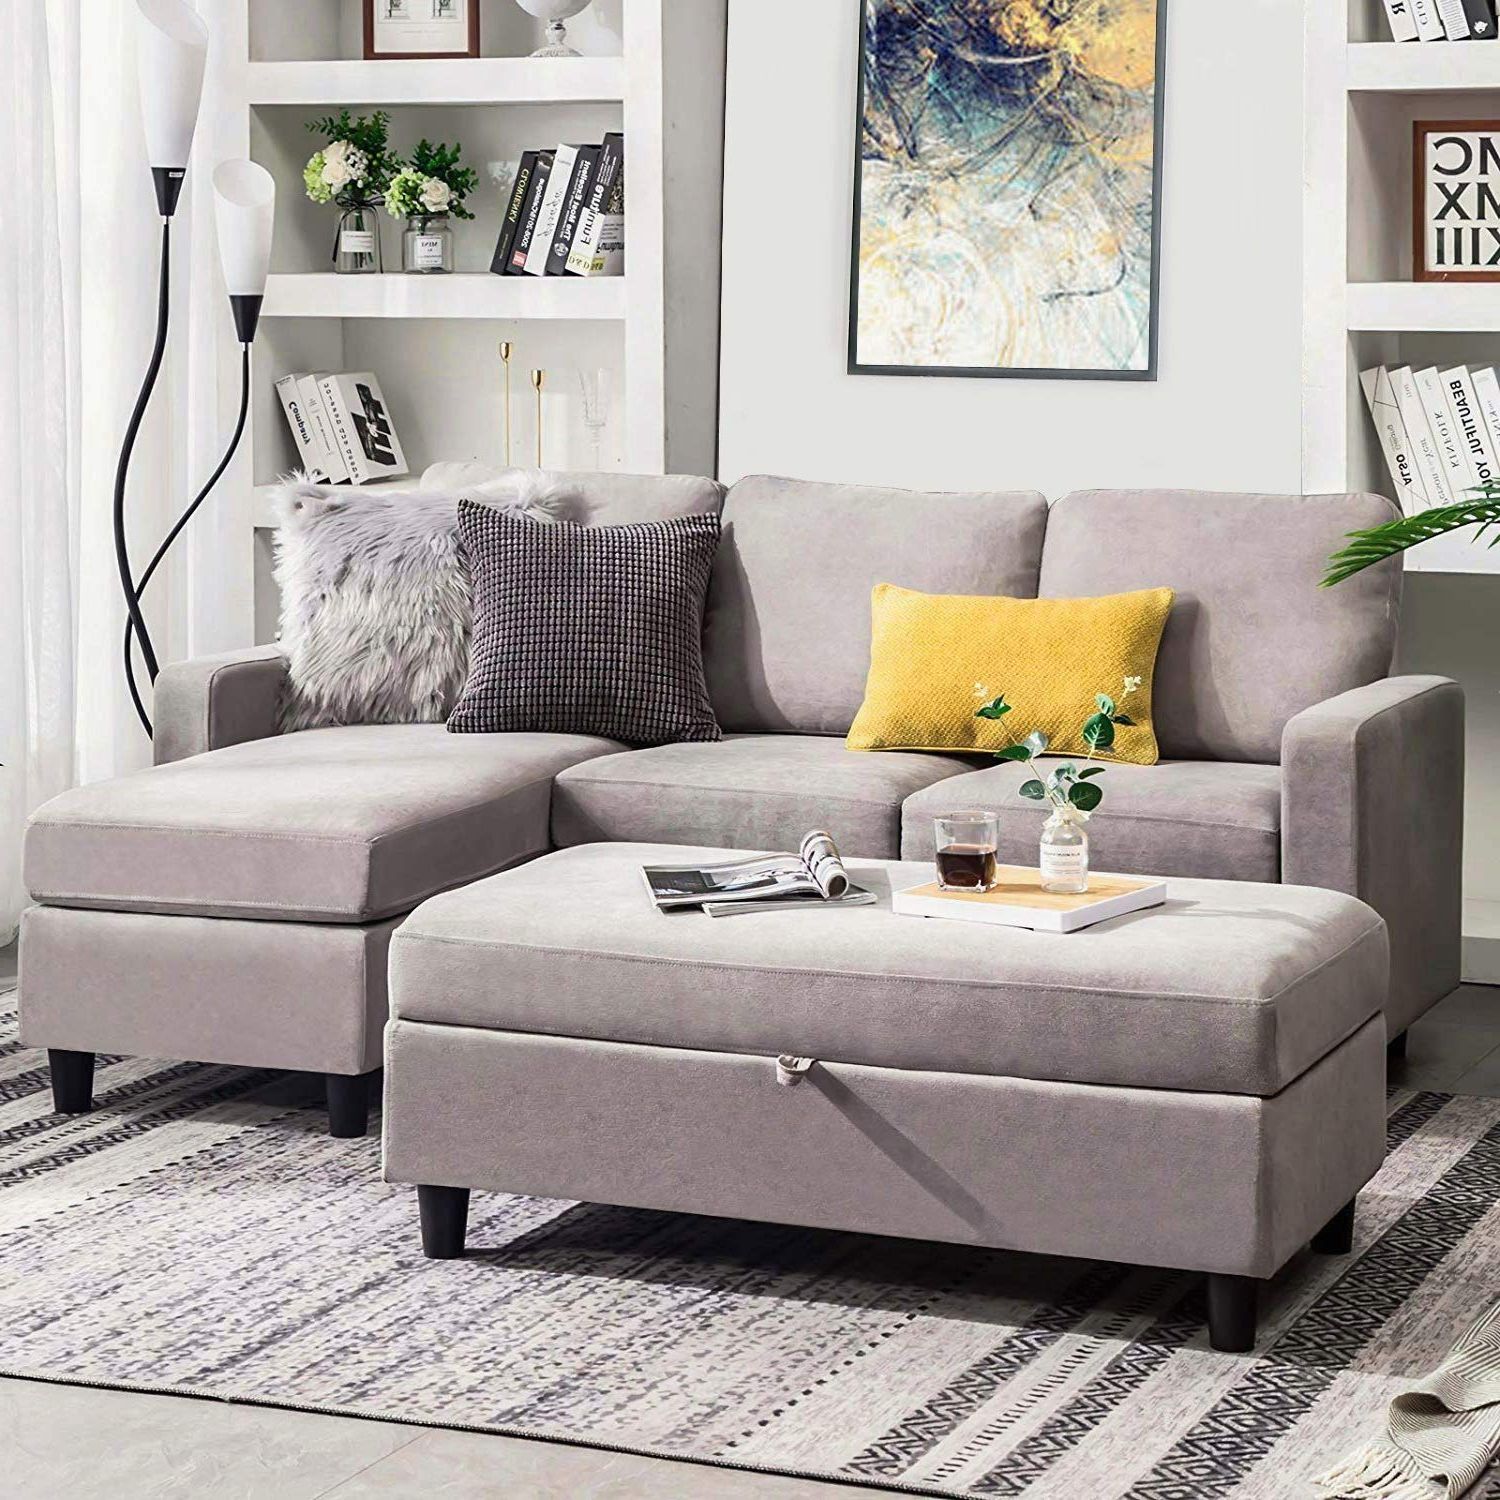 Honbay Grey Sectional Couch With Ottoman, Convertible L Shaped Chaise Pertaining To Most Recent Convertible L Shaped Sectional Sofas (View 4 of 15)